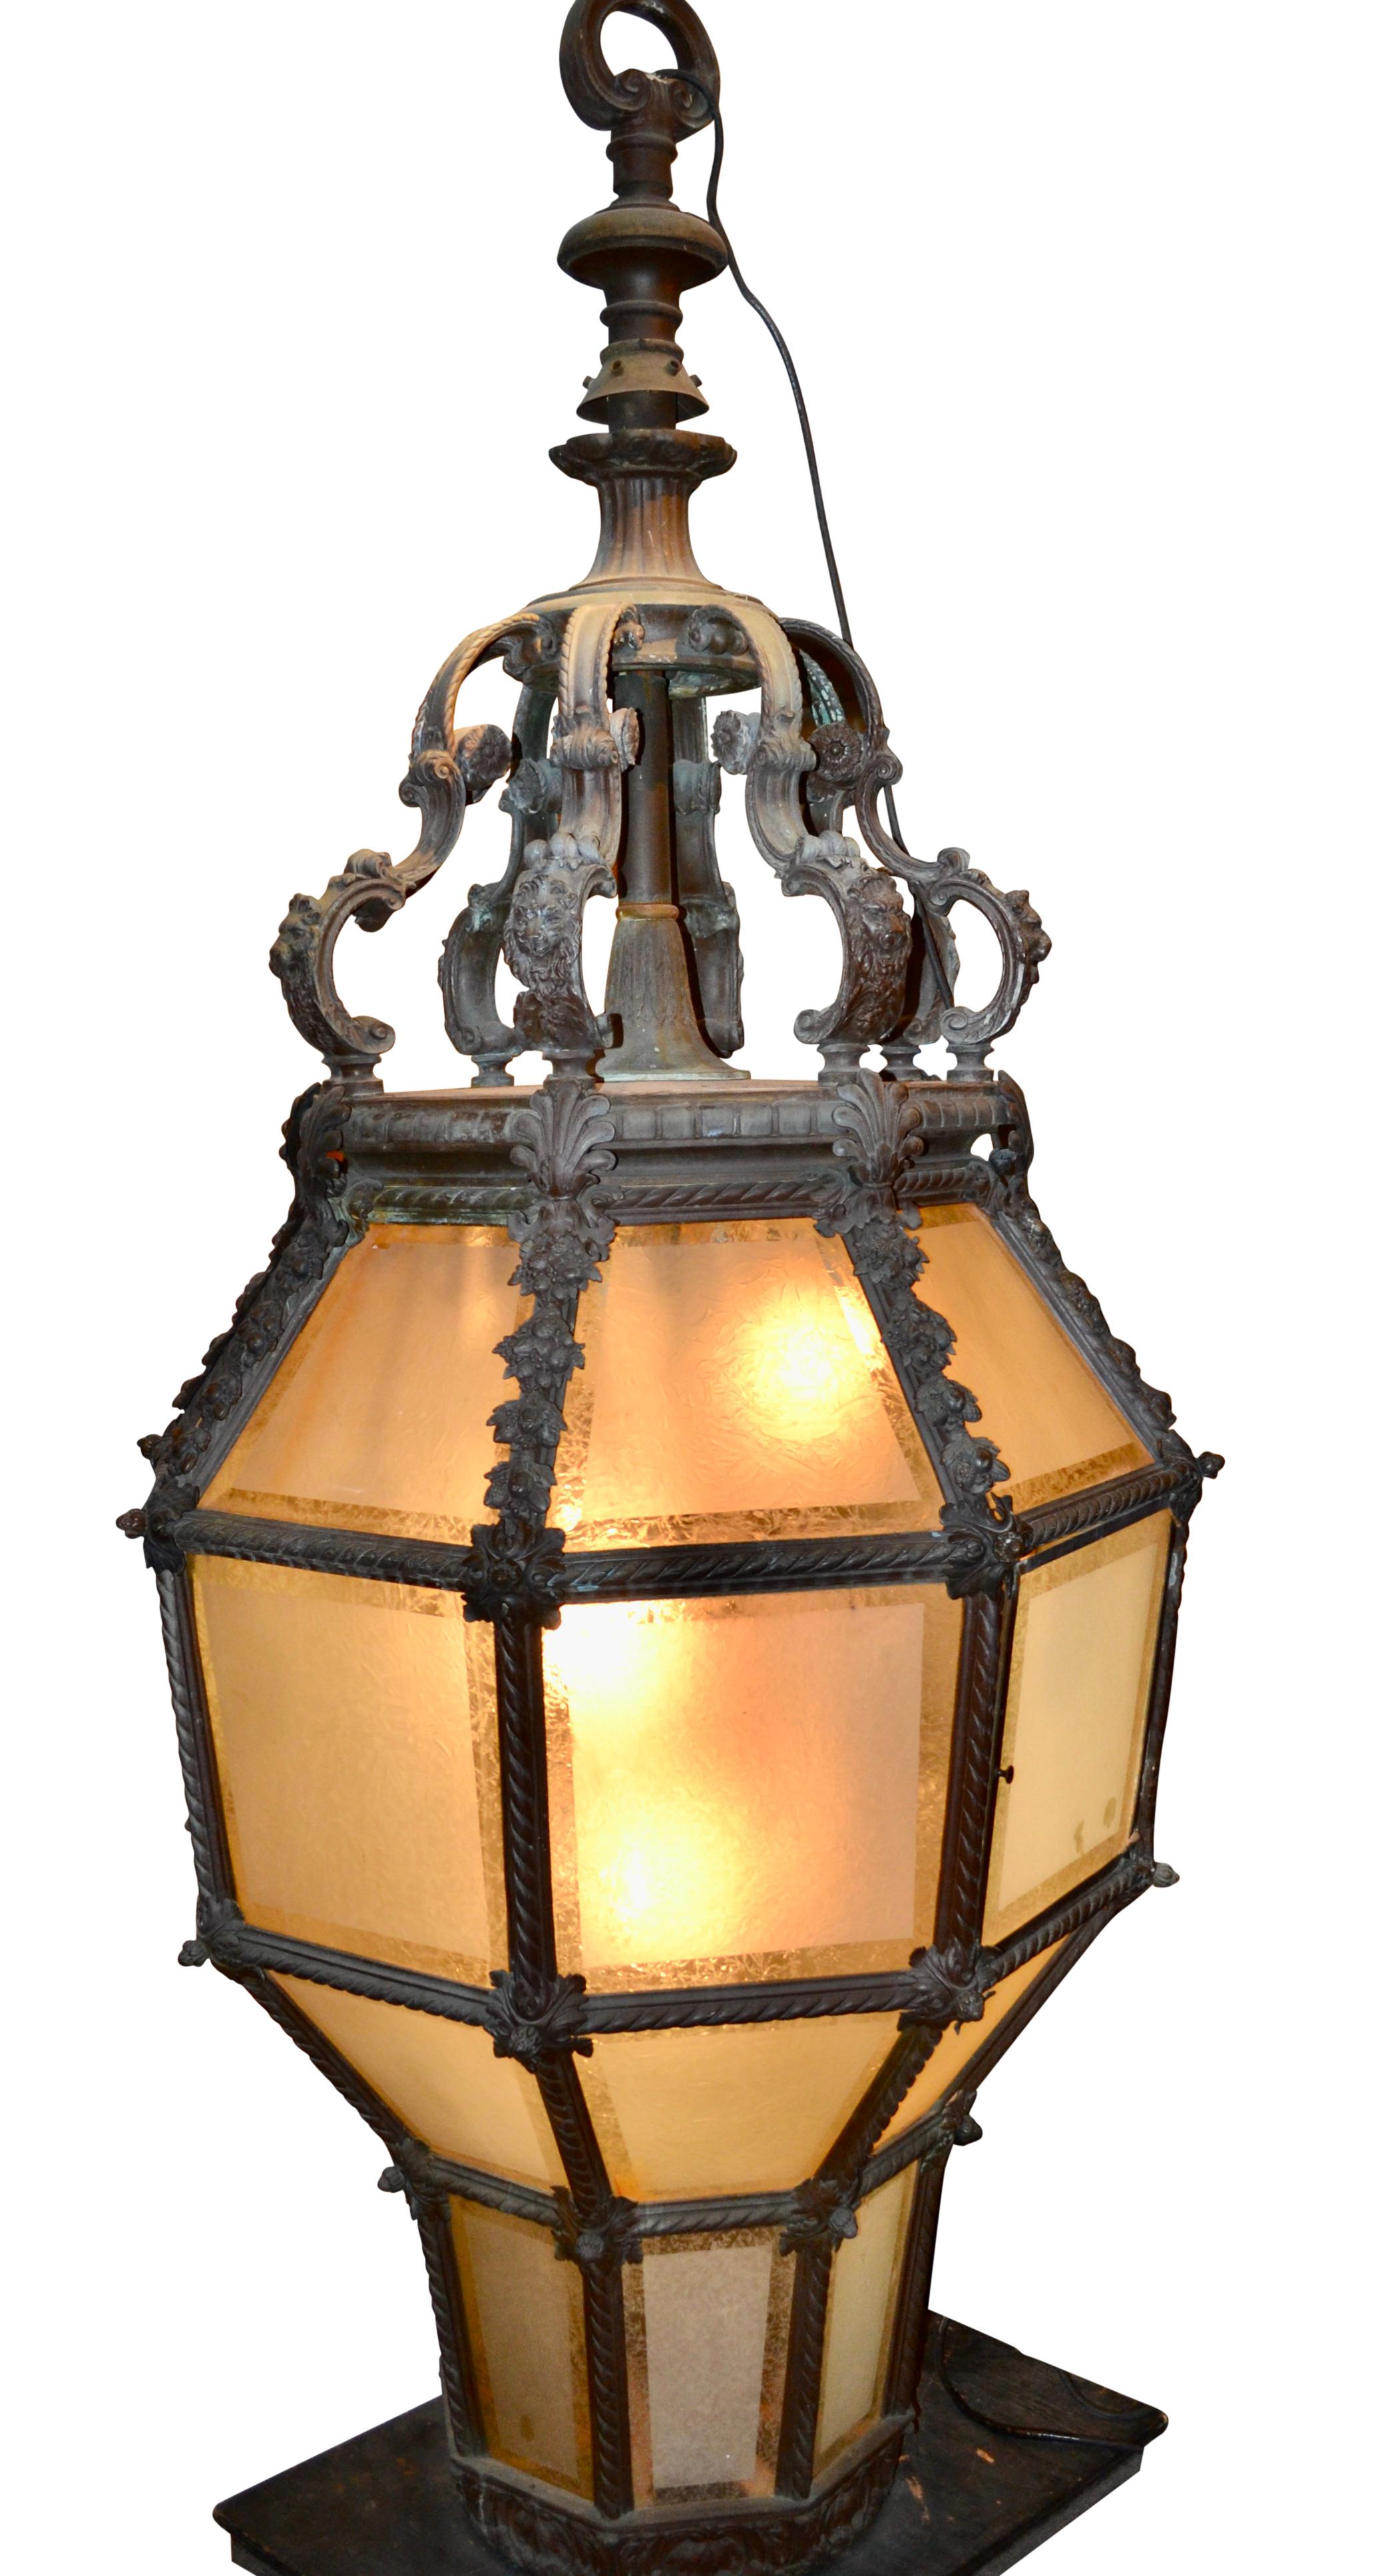 A monumental cast bronze and frosted glass porte cochere lantern; (a porte cochere is a roofed structure extending from the entrance of a building over an adjacent driveway and sheltering those getting in or out of vehicles). This example was likely